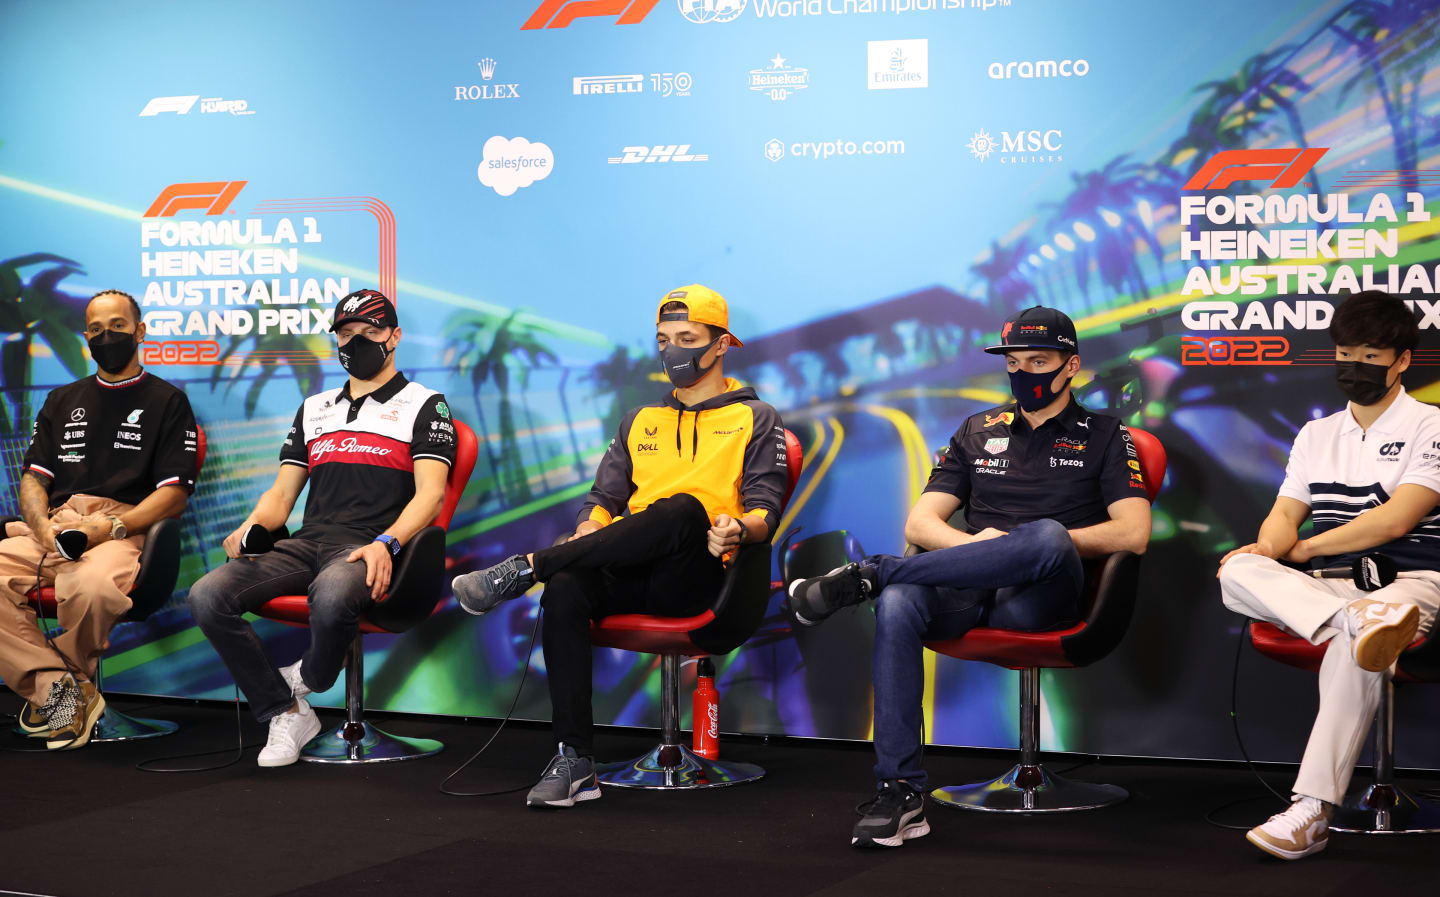 MELBOURNE, AUSTRALIA - APRIL 08: (L-R) Lewis Hamilton of Great Britain and Mercedes, Valtteri Bottas of Finland and Alfa Romeo F1, Lando Norris of Great Britain and McLaren, Max Verstappen of the Netherlands and Oracle Red Bull Racing and Yuki Tsunoda of Japan and Scuderia AlphaTauri attend the Drivers Press Conference prior to during practice ahead of the F1 Grand Prix of Australia at Melbourne Grand Prix Circuit on April 08, 2022 in Melbourne, Australia. (Photo by Robert Cianflone/Getty Images)